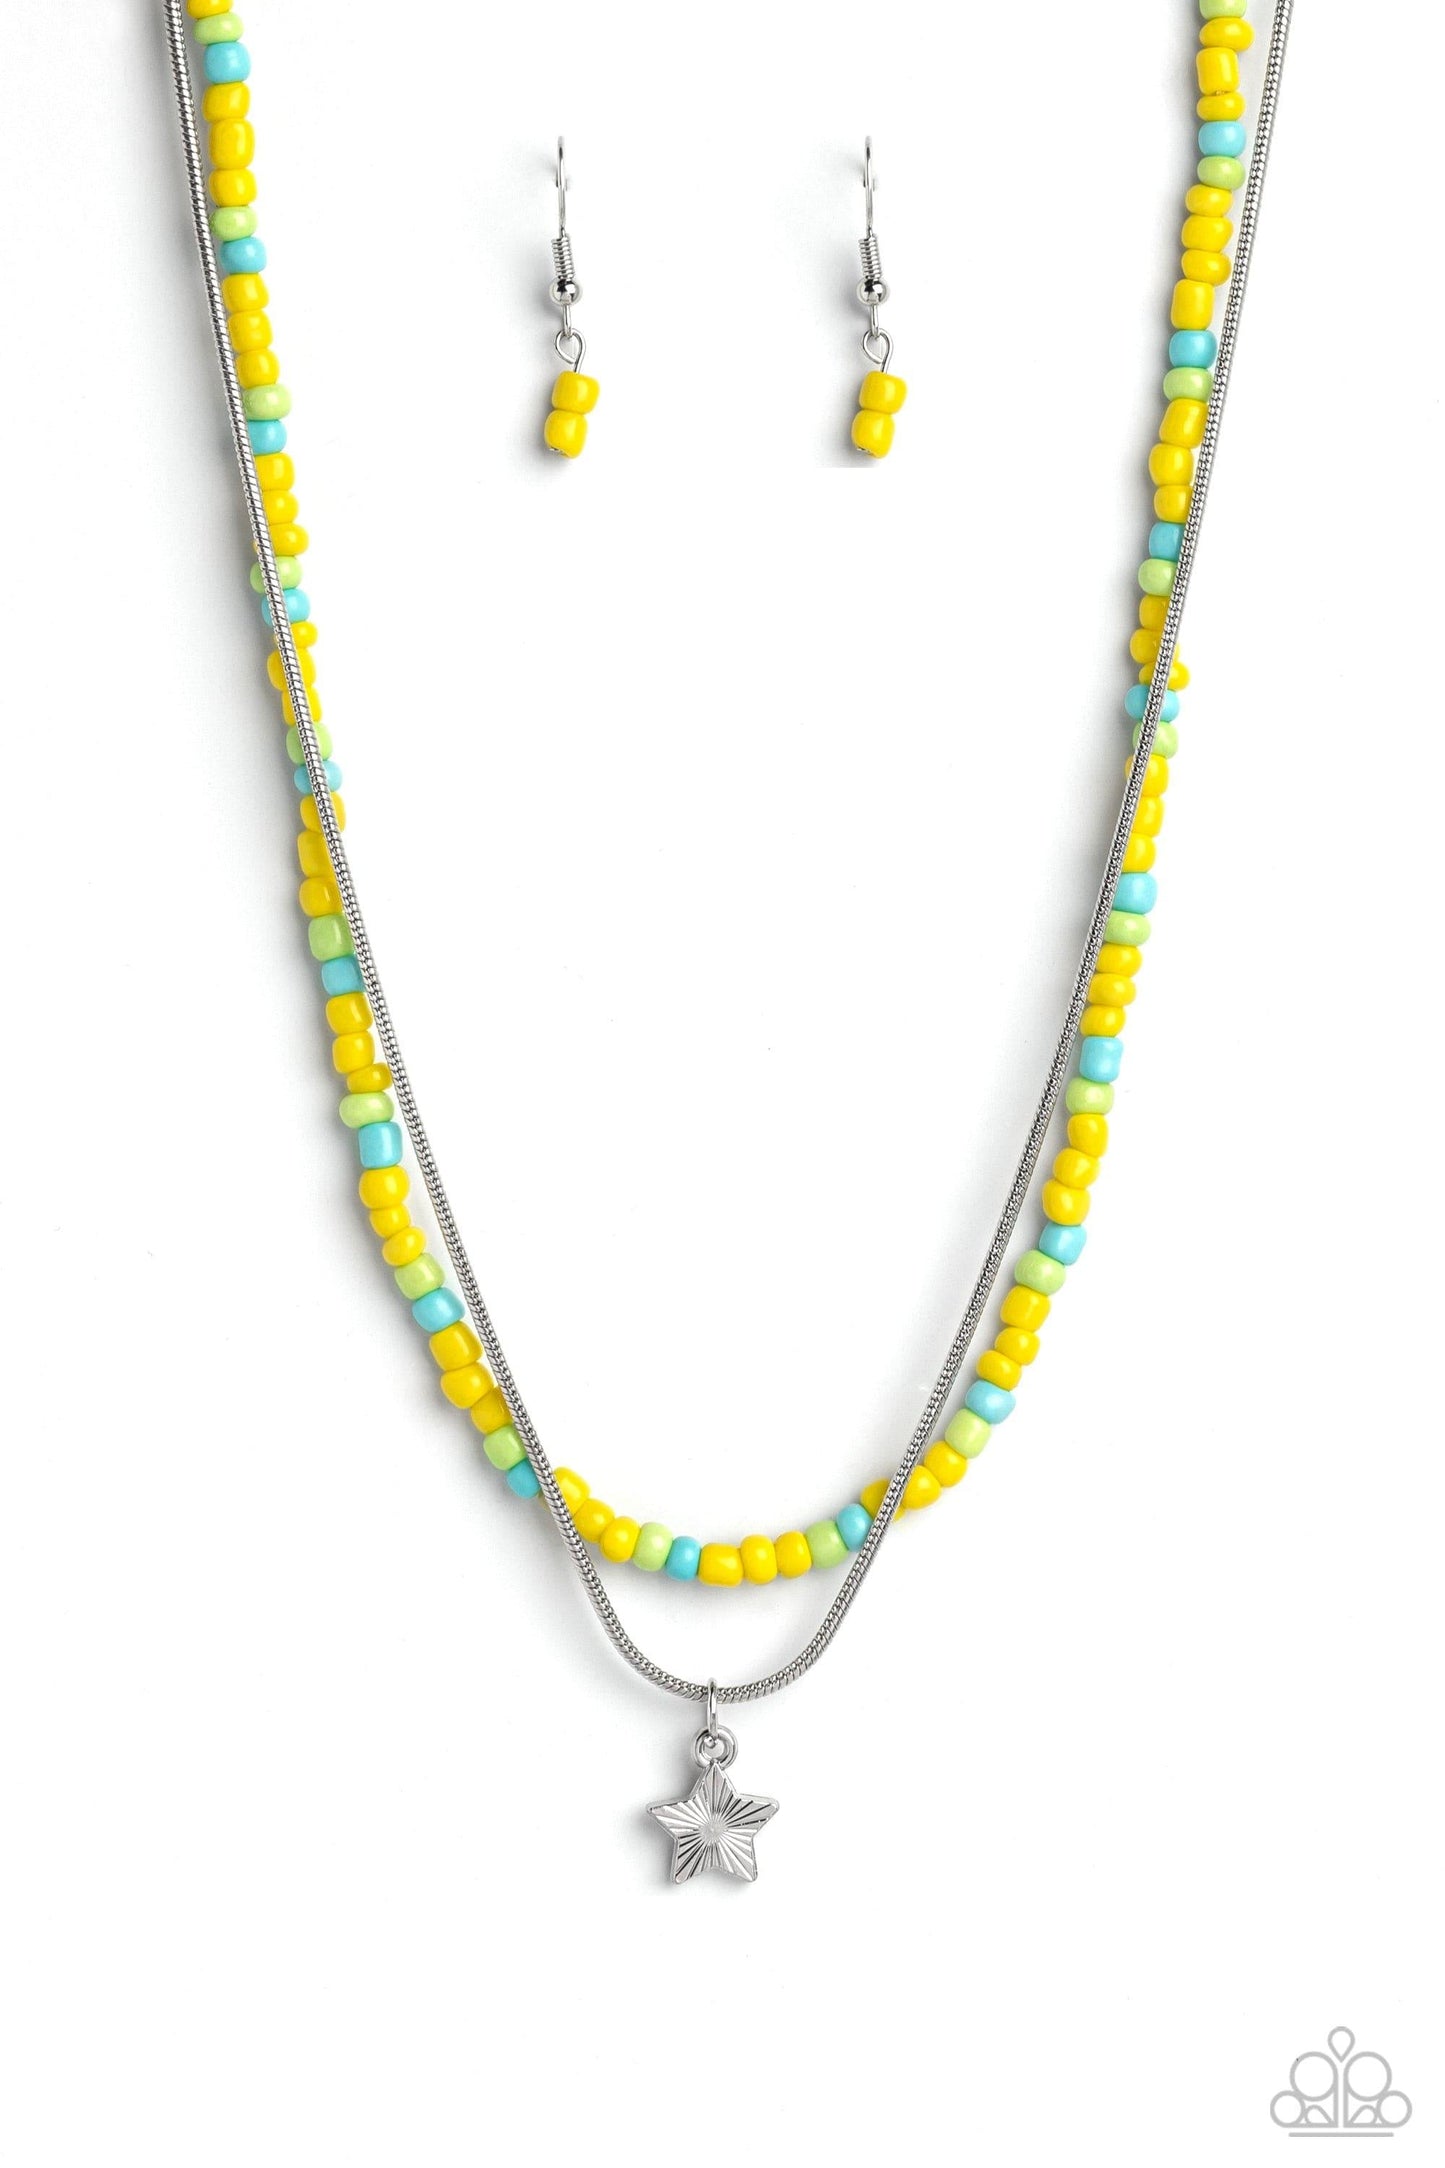 Paparazzi Accessories - Starry Serendipity - Yellow Necklace - Bling by JessieK